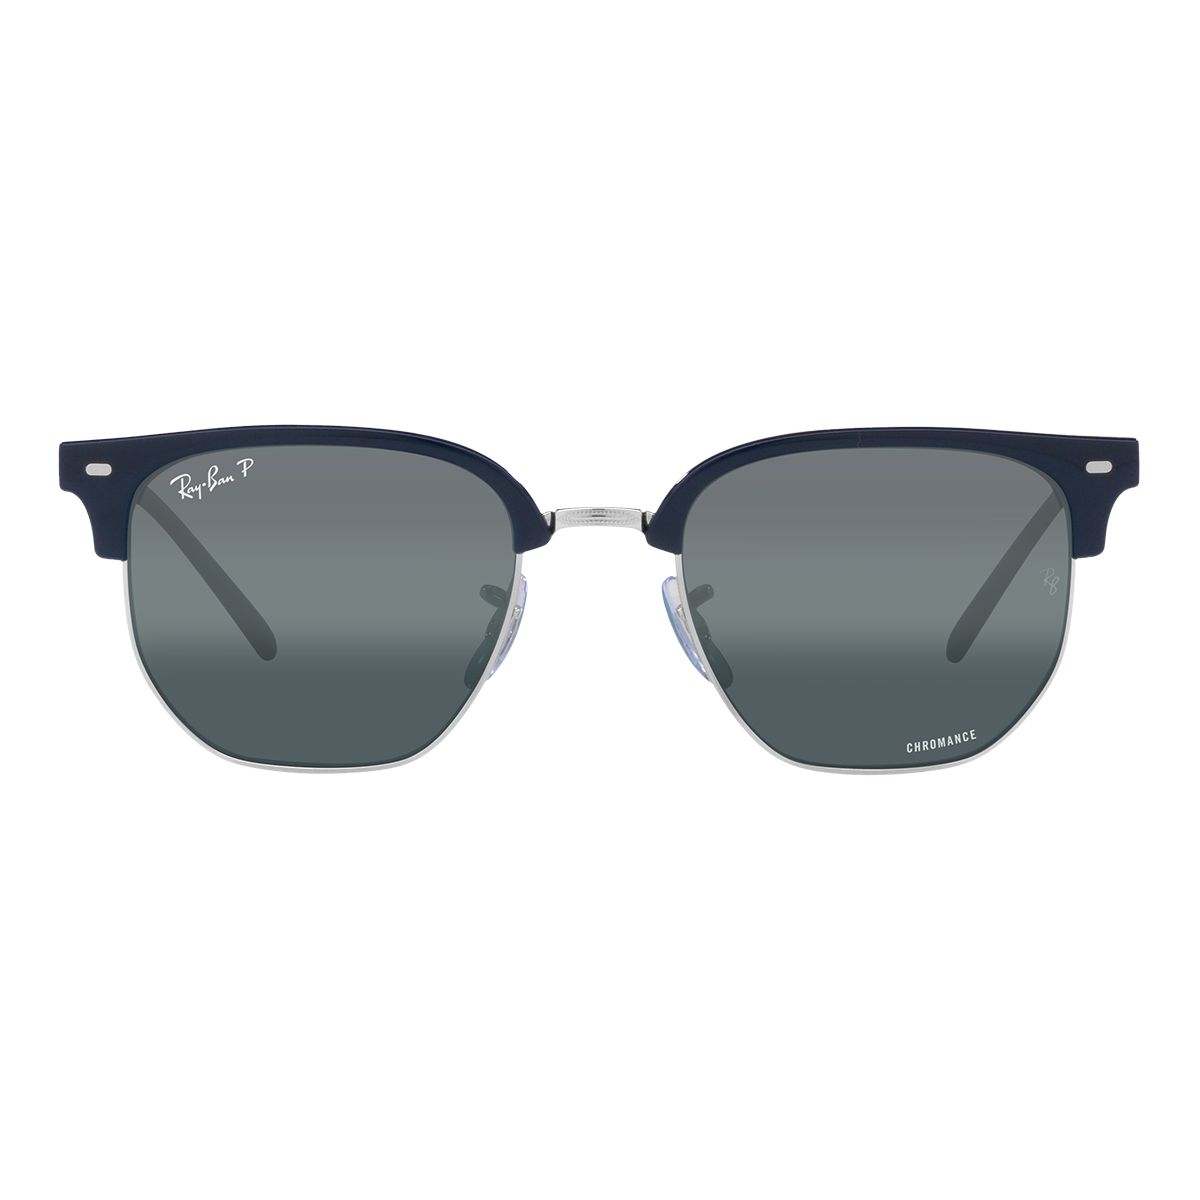 Image of Ray Ban New Clubmaster Sunglasses